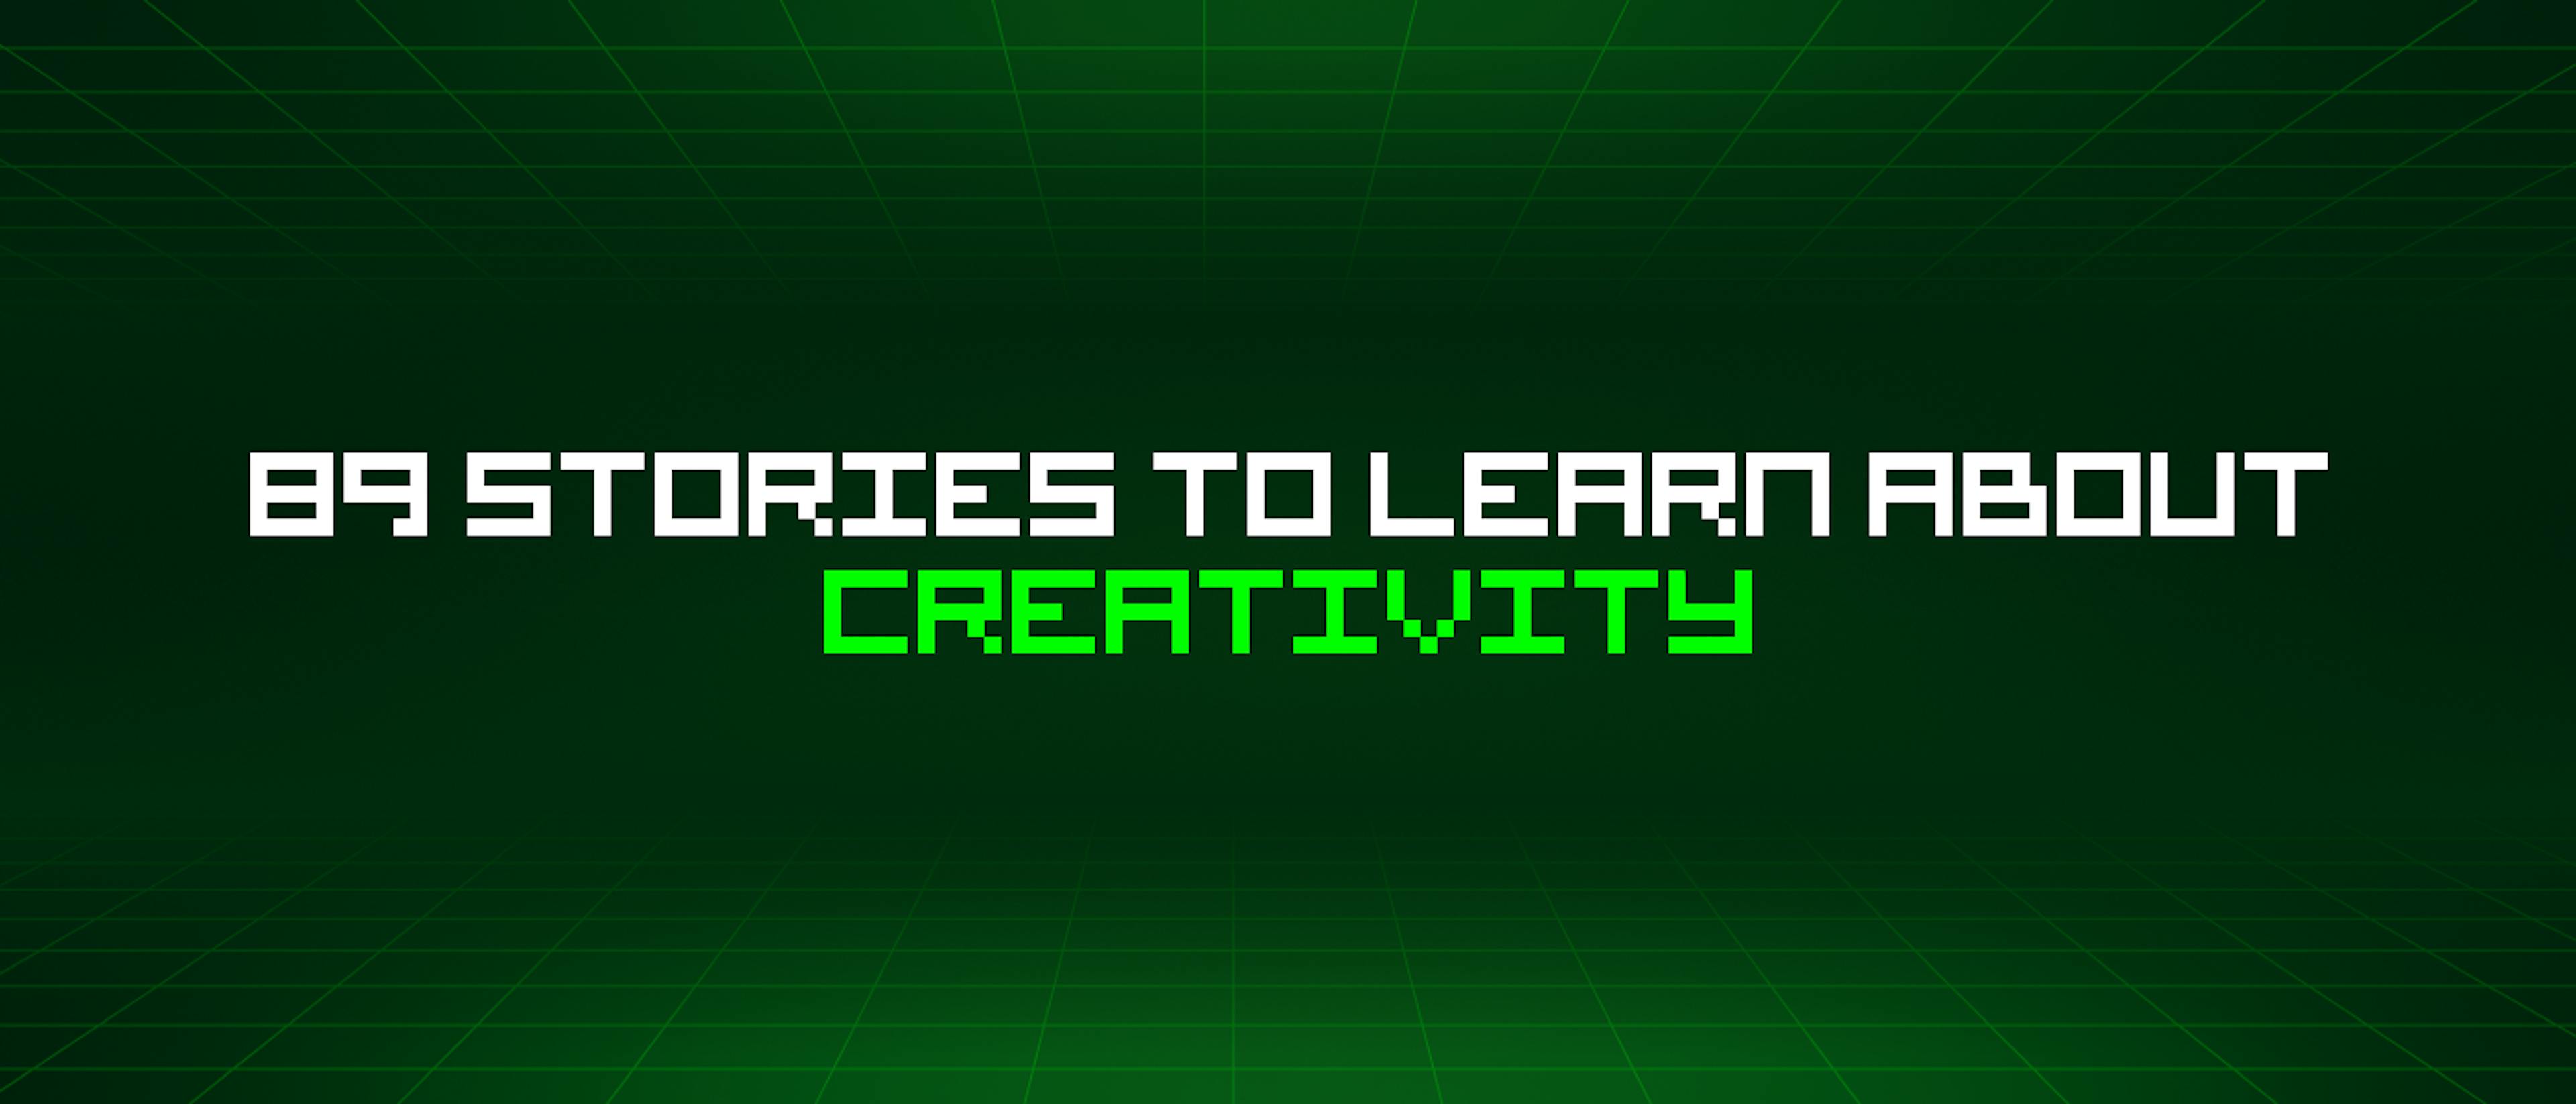 /89-stories-to-learn-about-creativity feature image